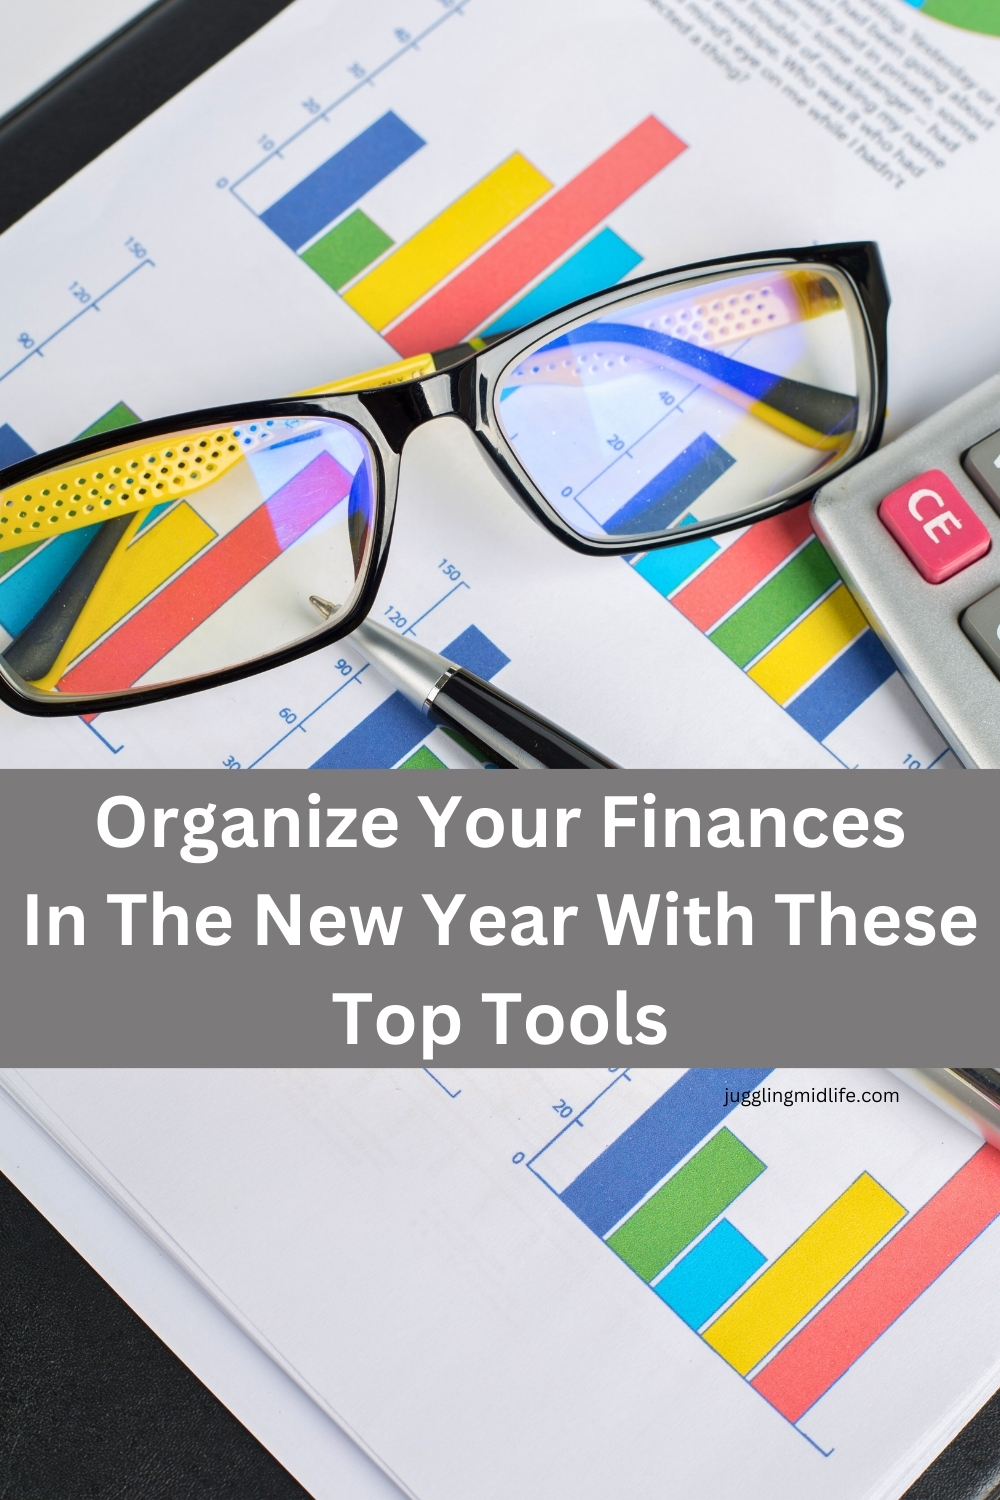 Organize Your Finances In The New Year